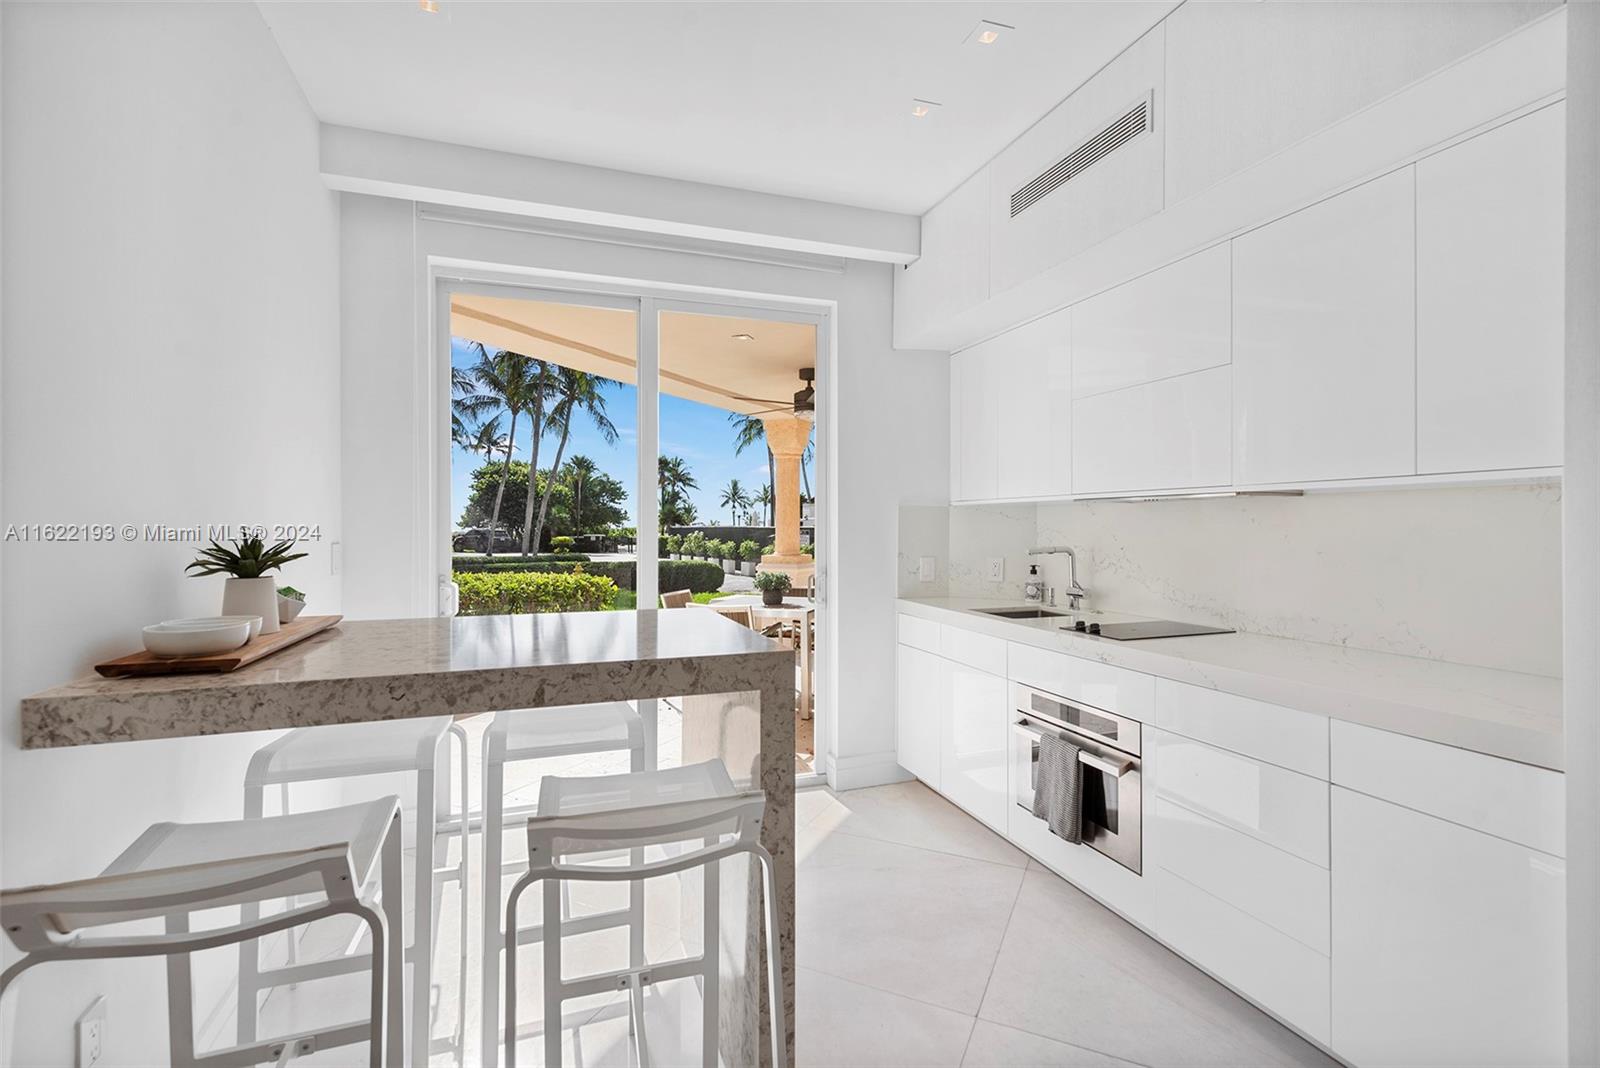 Live the Fisher Island lifestyle in this charming Seaside Villa ground floor unit overlooking beautiful views of the pool and ocean. The unit has been completely renovated. Offered fully furnished, available short and long term. Easy to show!